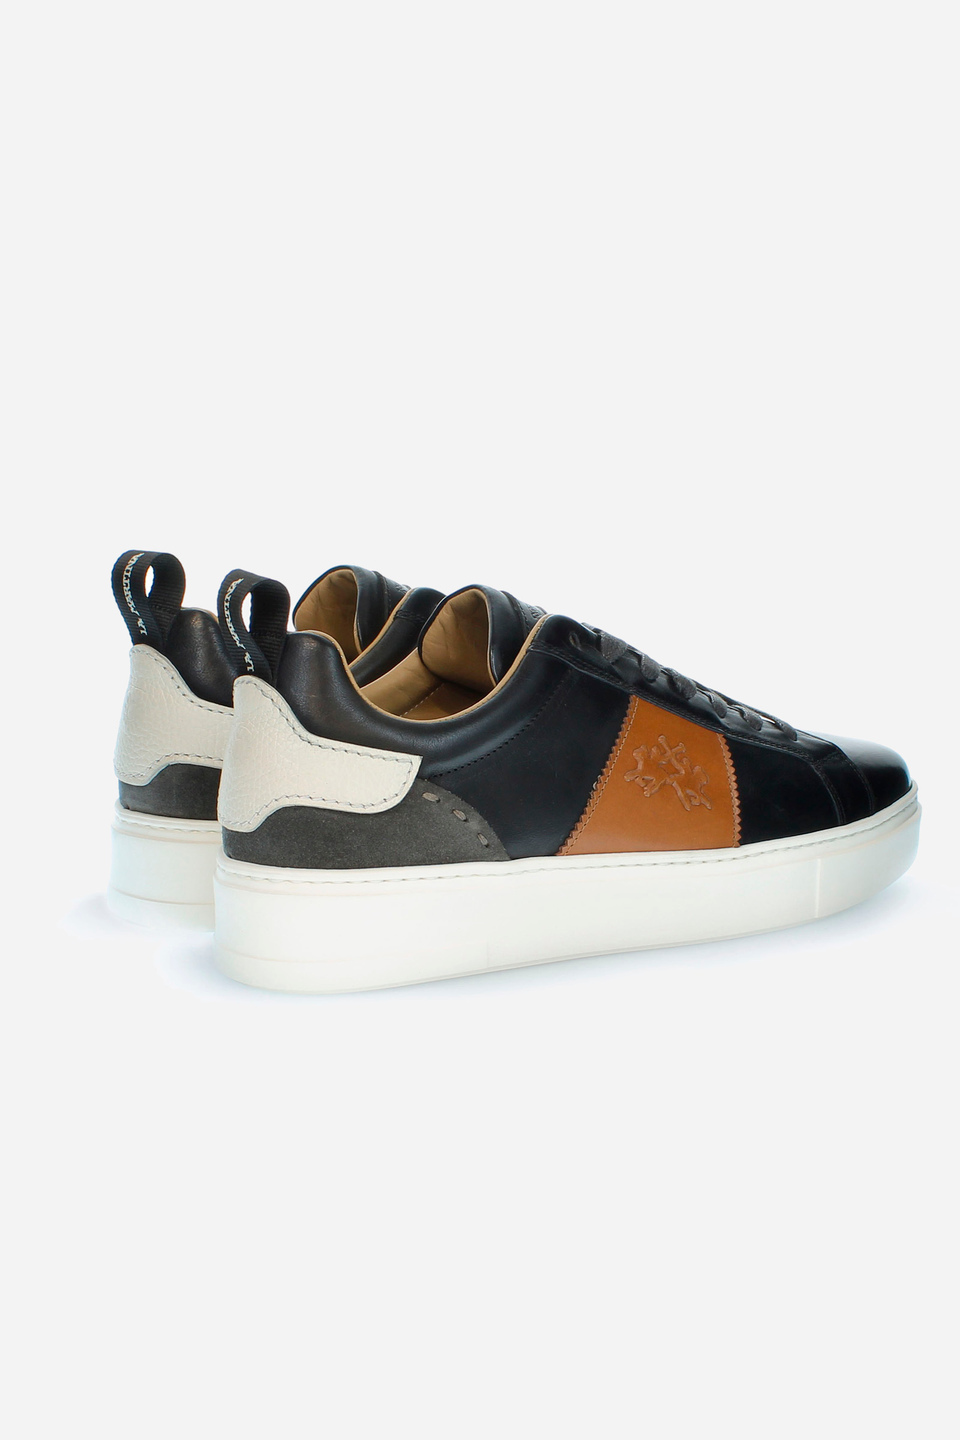 Men’s sneaker in a mix of calfskin and suede | La Martina - Official Online Shop